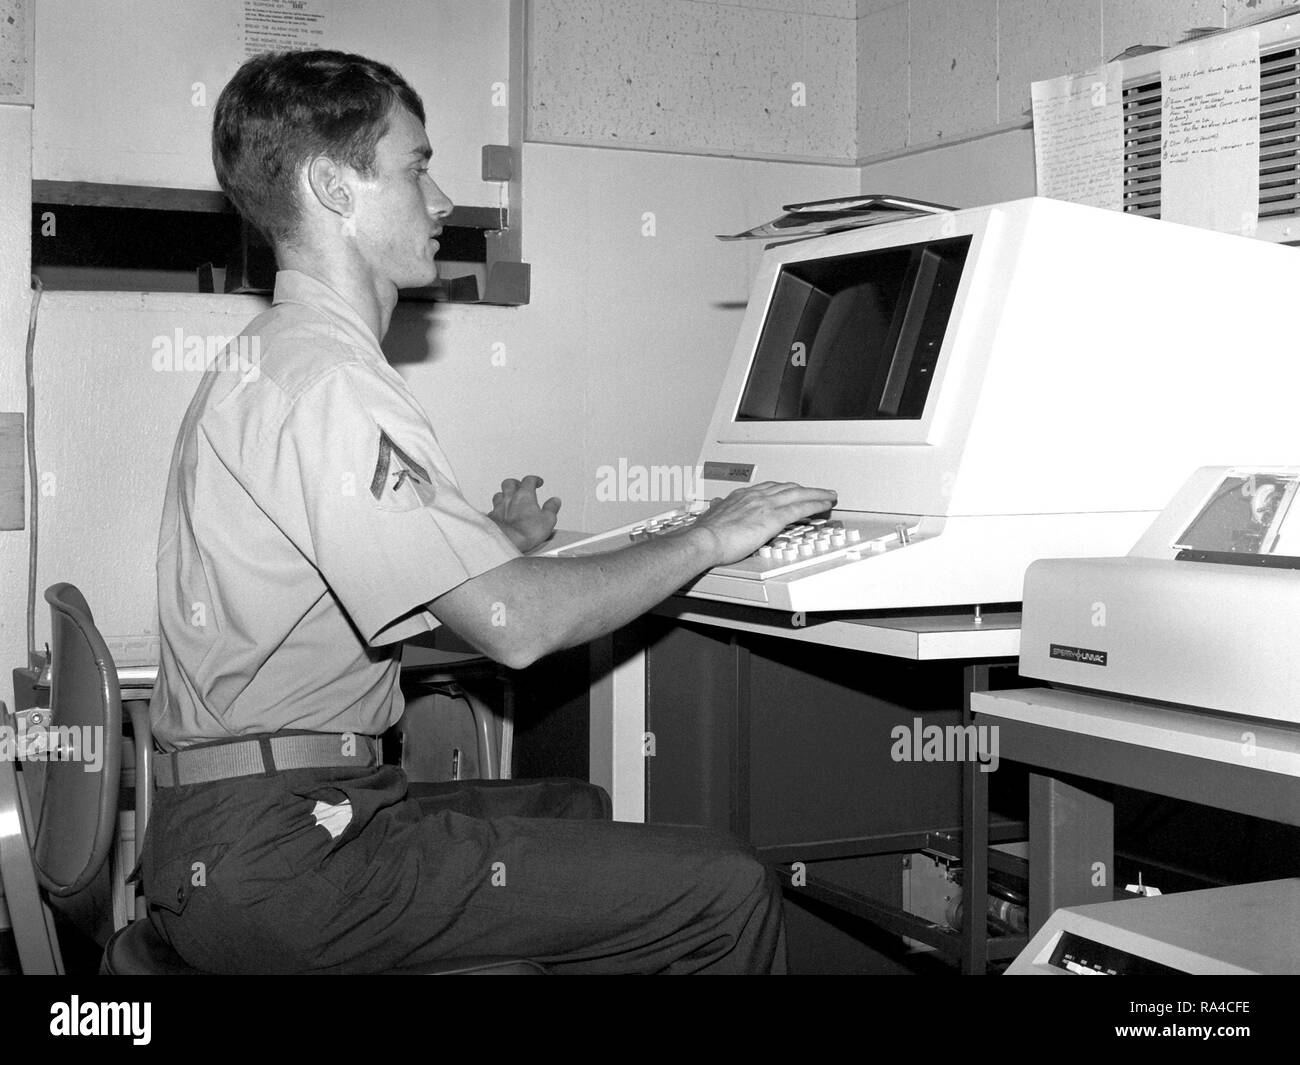 1979 - LCPL H.D. Sulger of the base communications center is processing a message on a Univac optical character reader so that the message can be transmitted to another military base. Stock Photo